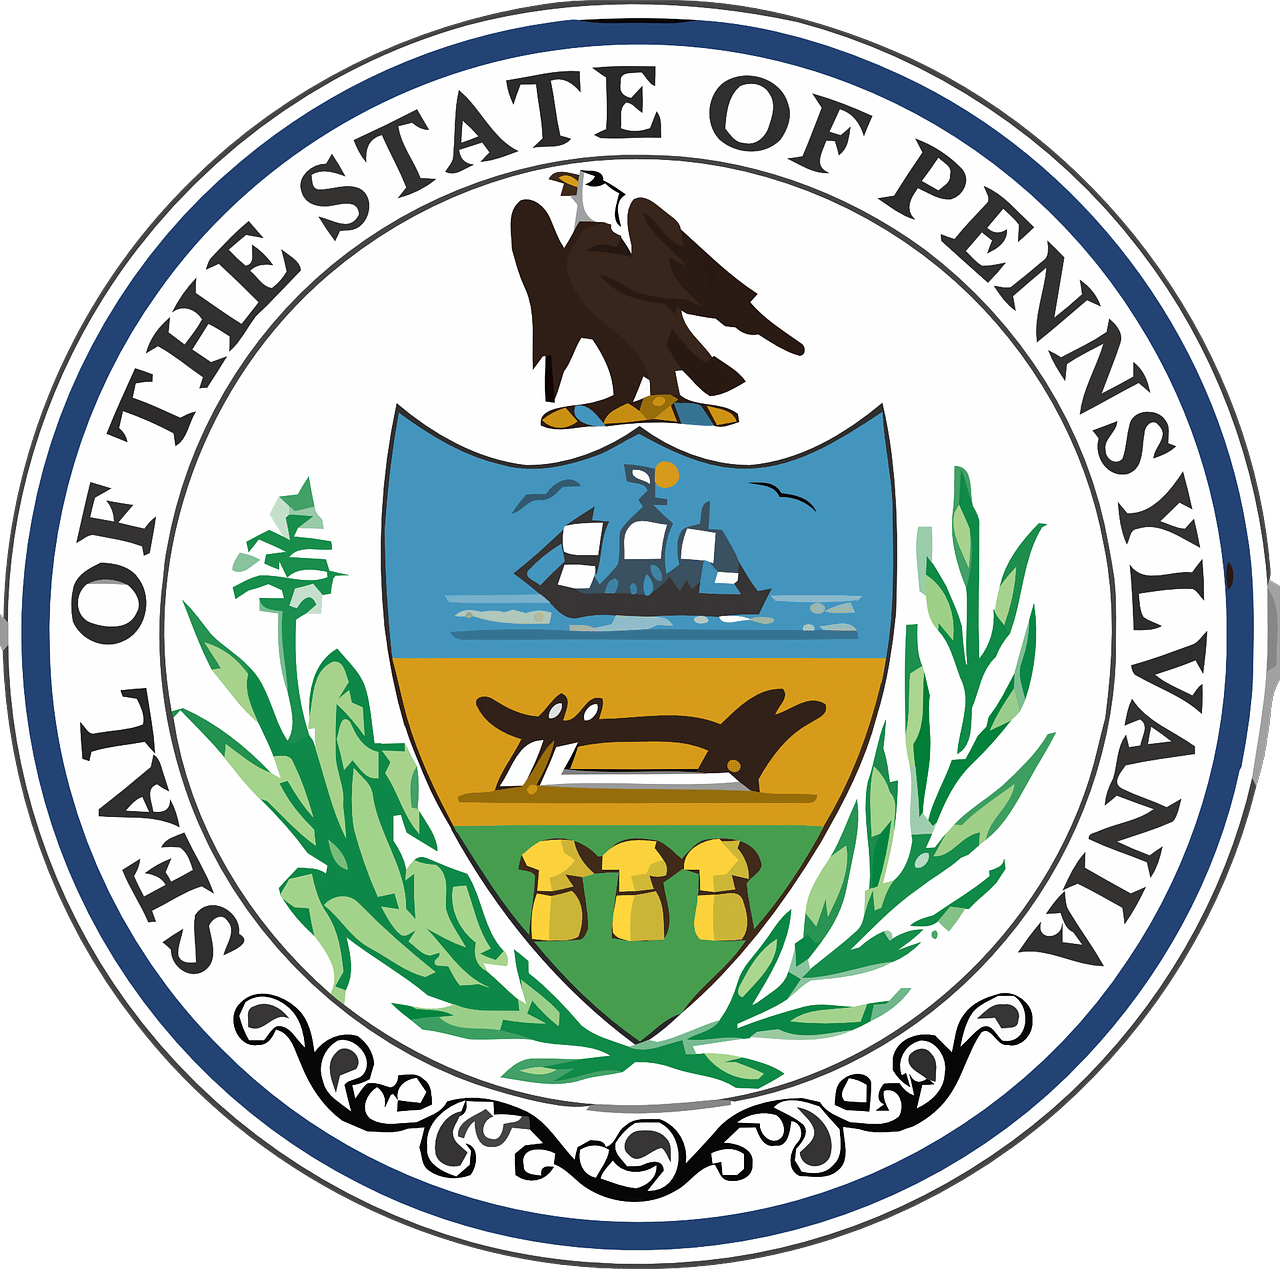 Pennsylvania Lawmakers Reintroduce Bipartisan Bills Transitioning State To 100 Percent Renewables by 2050